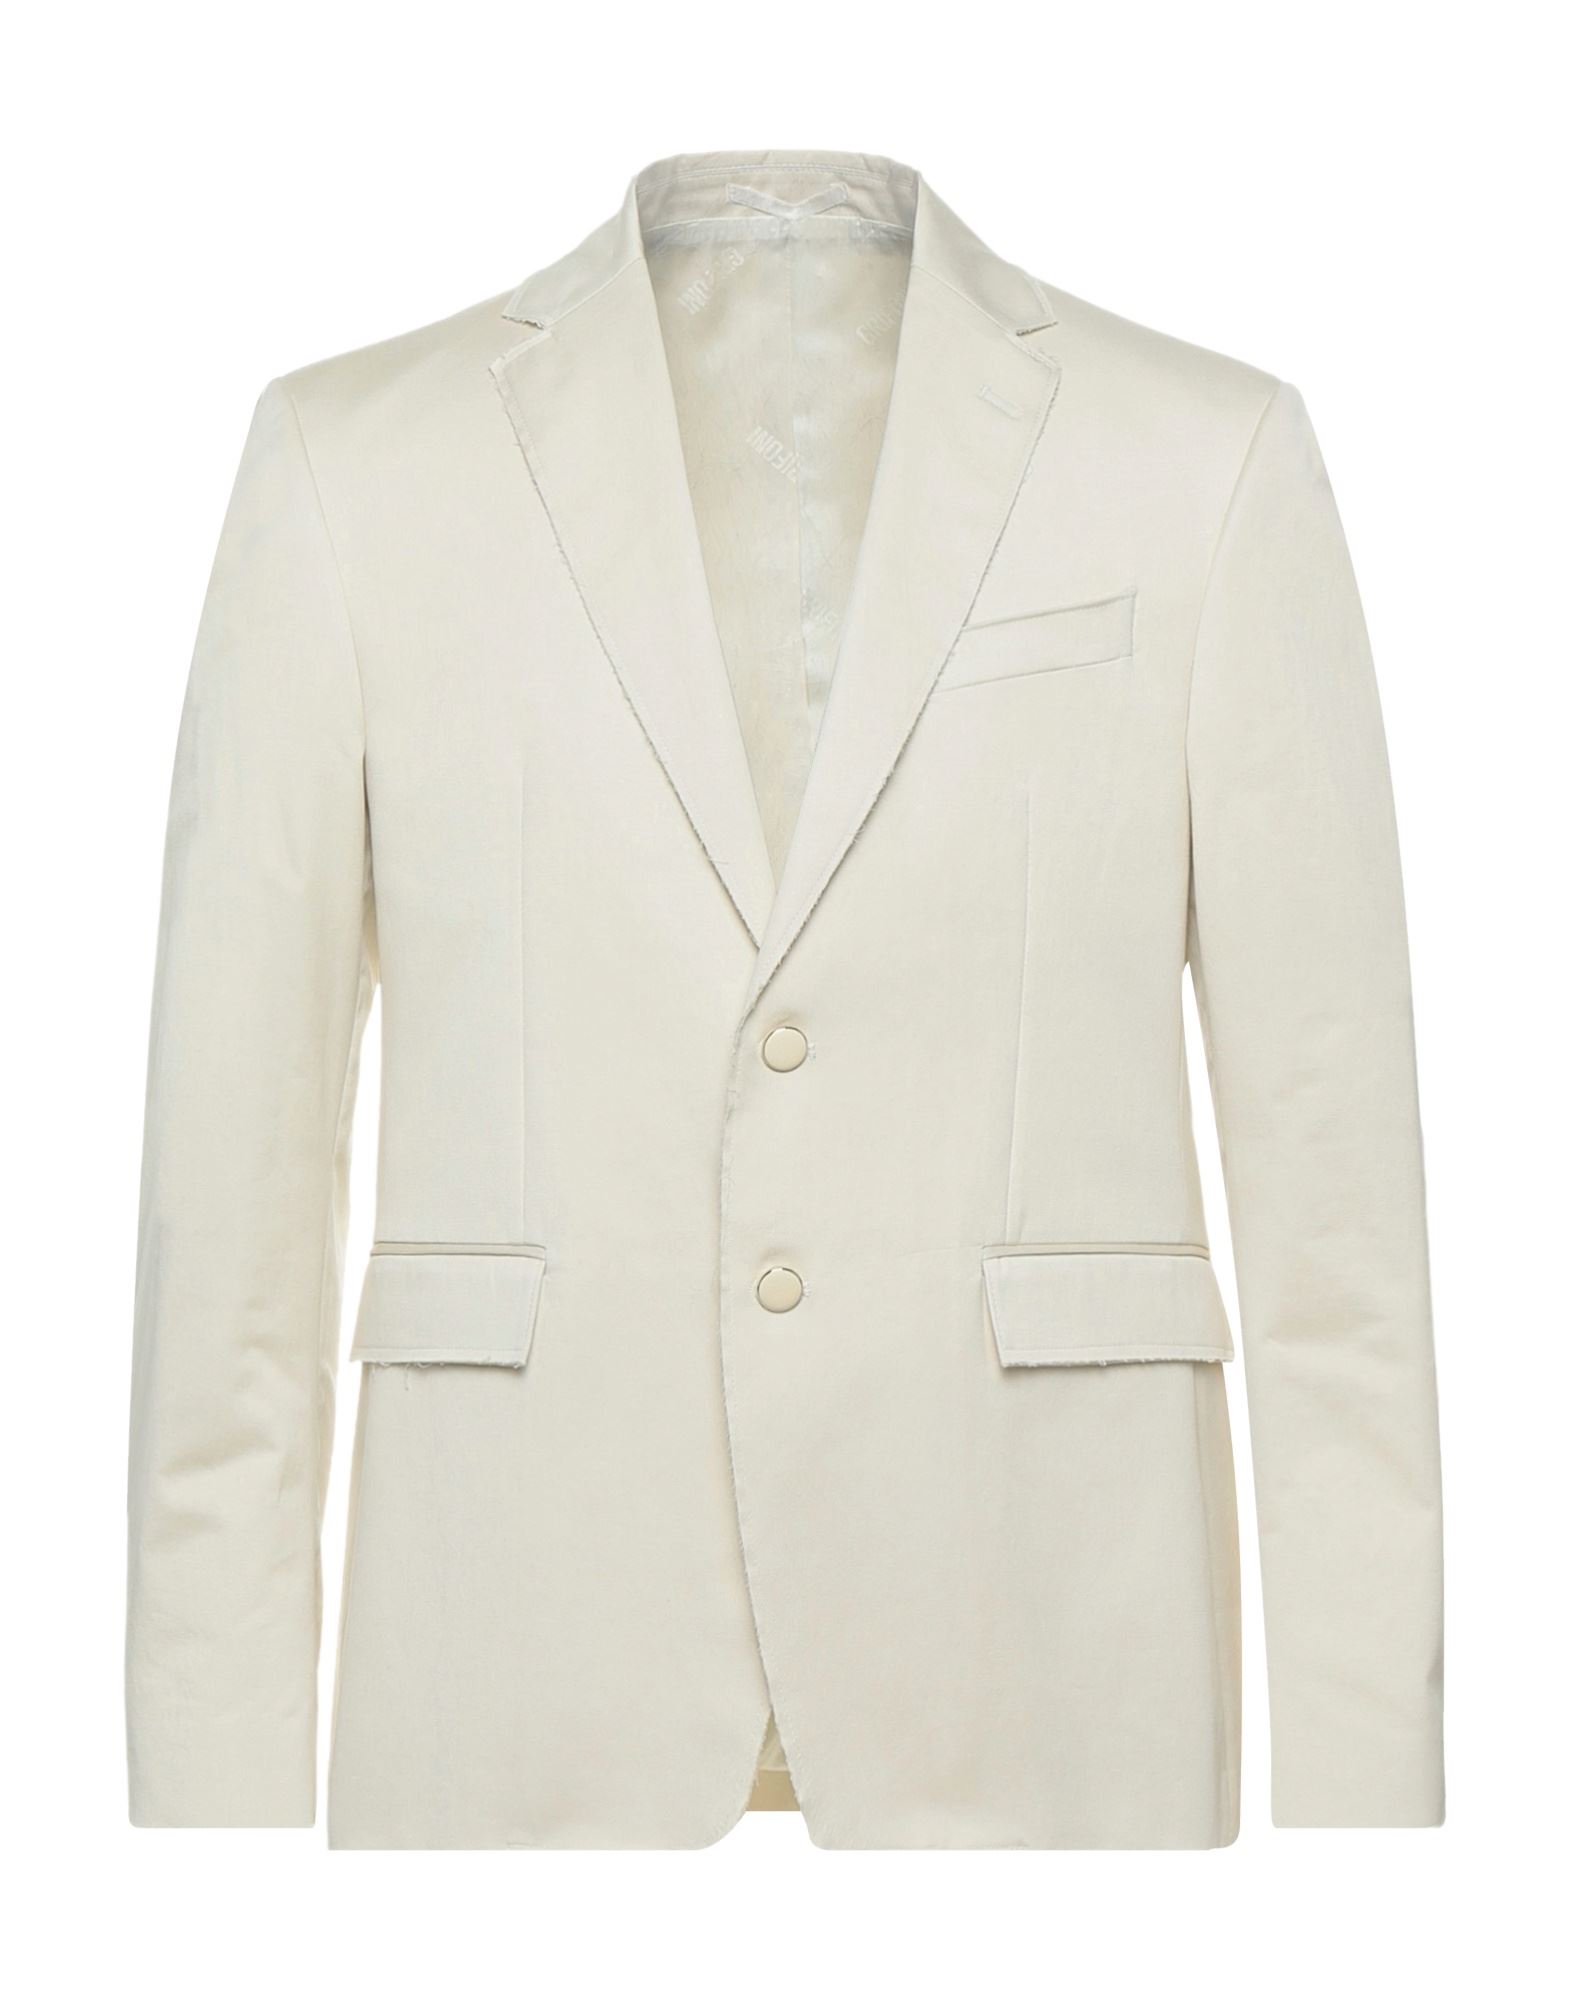 Mauro Grifoni Suit Jackets In White